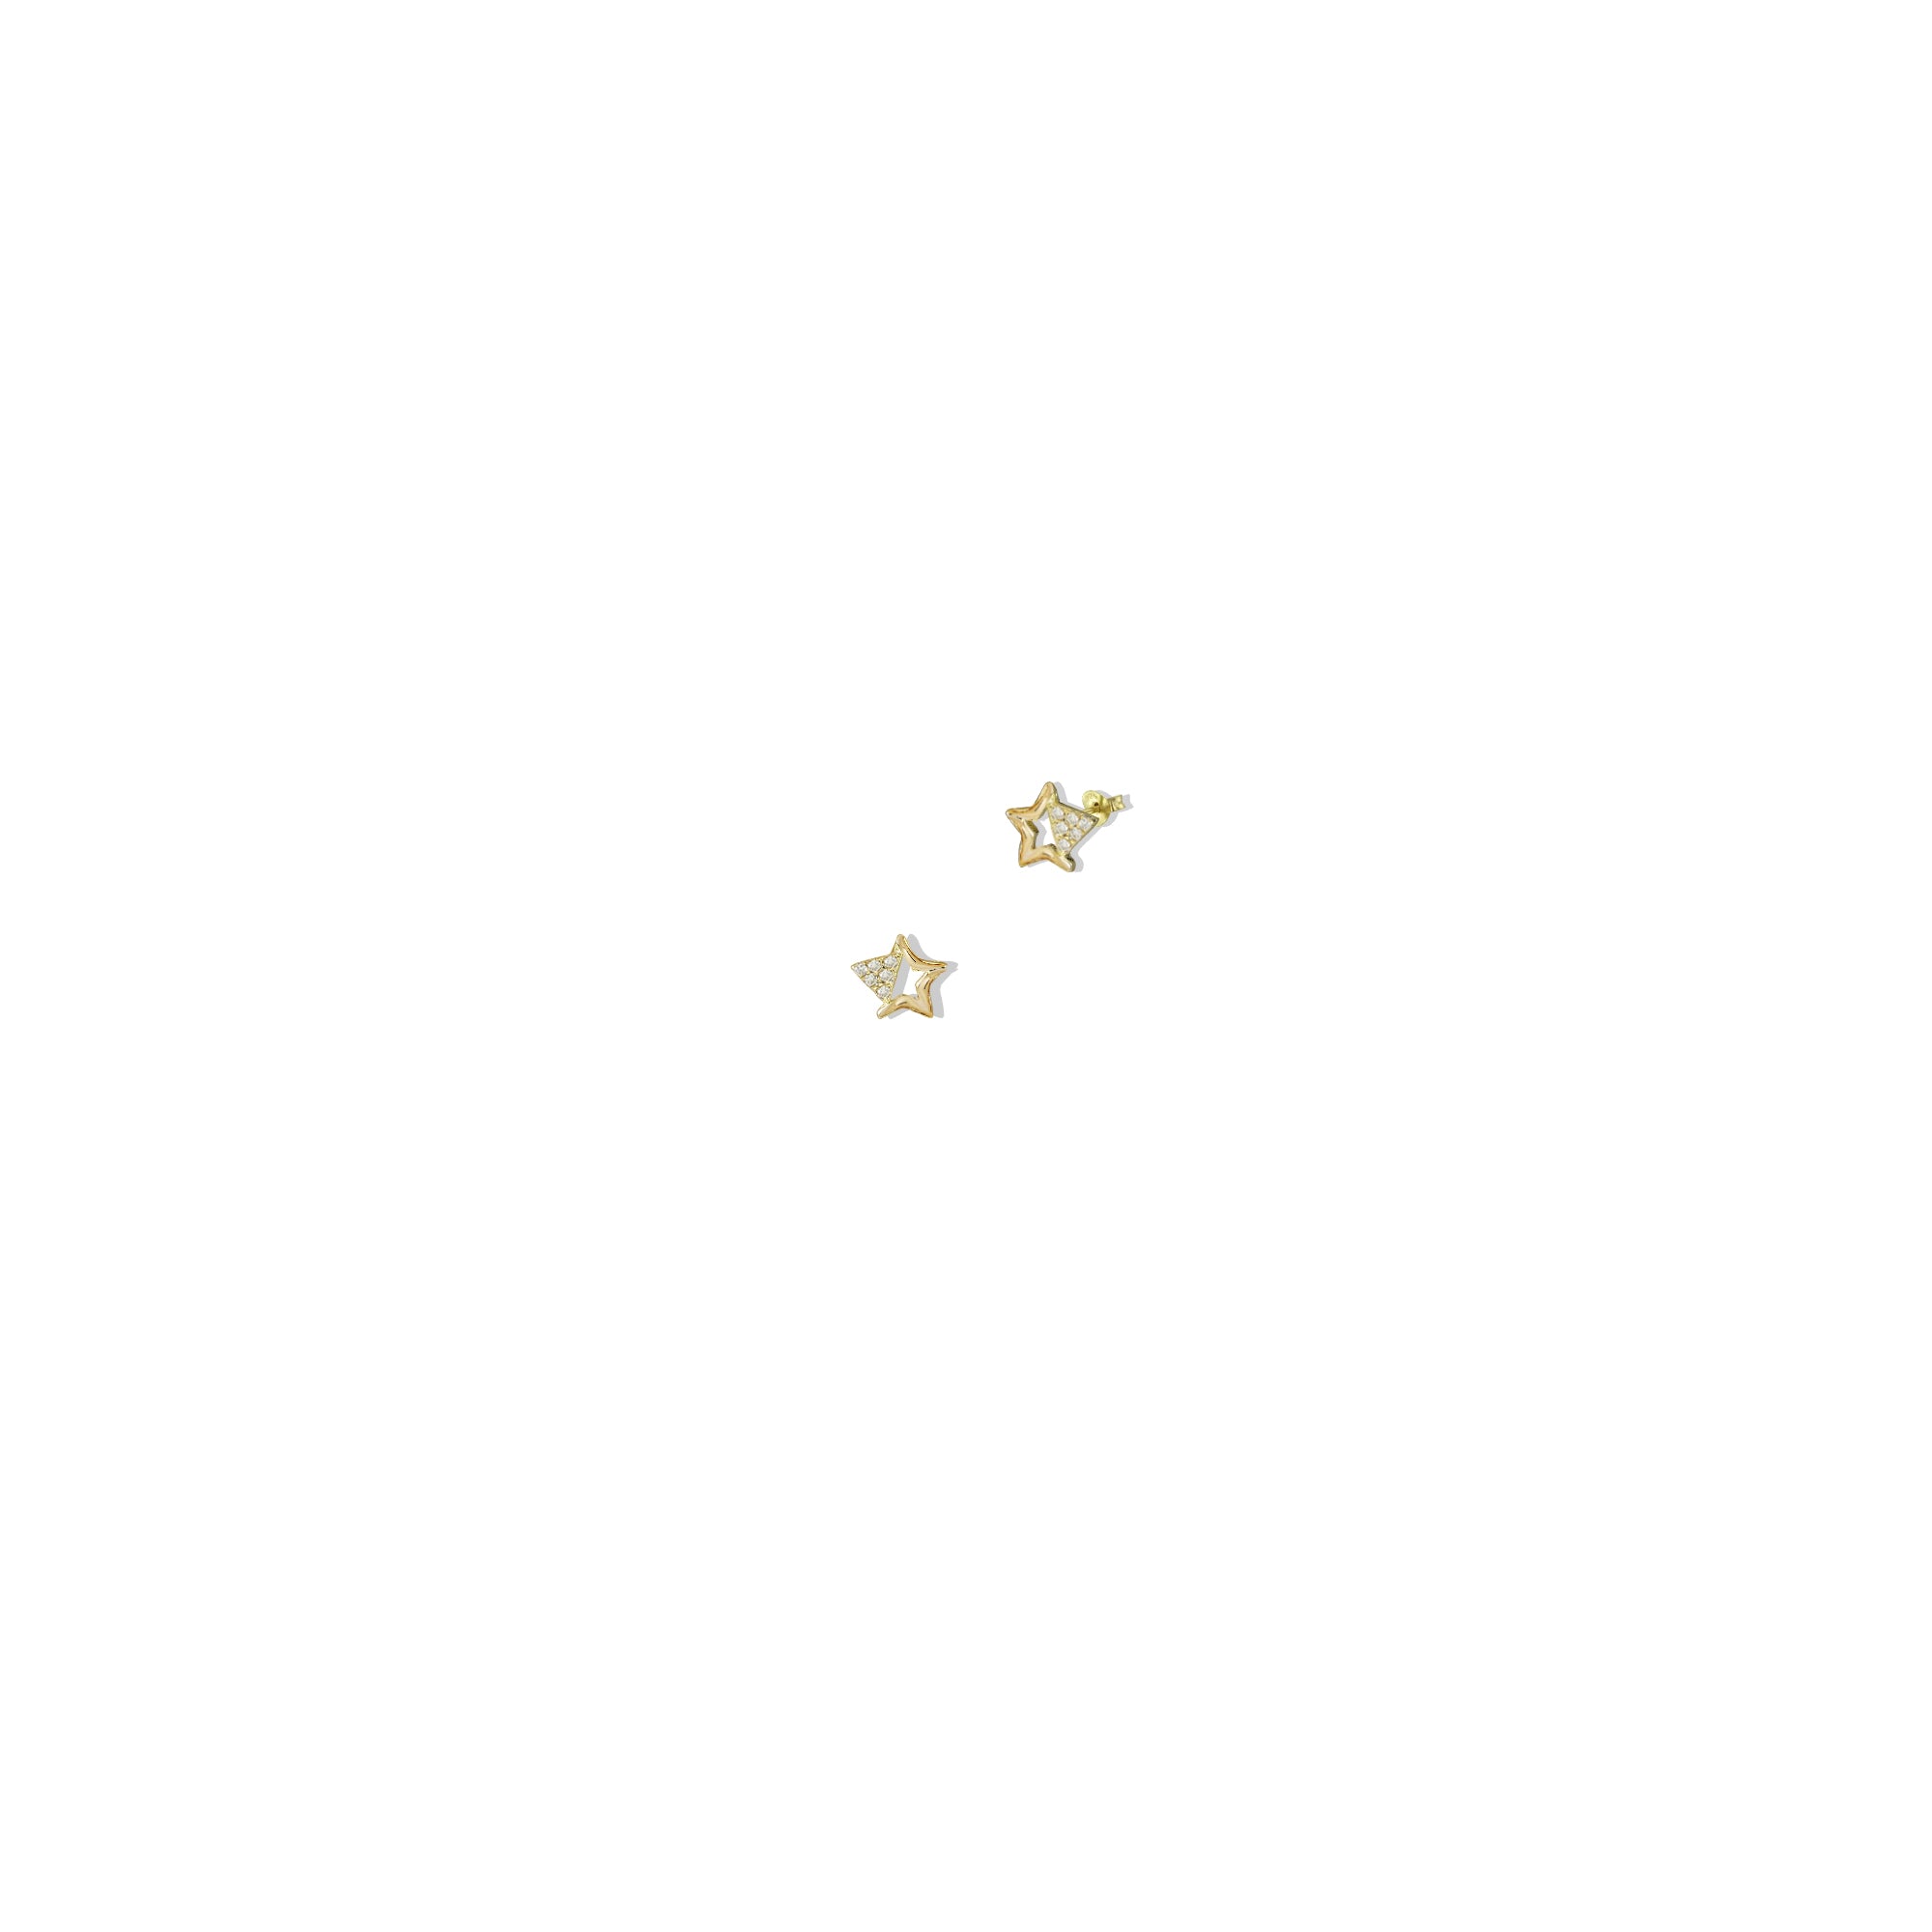 THE 14K GOLD OPEN STAR STUD